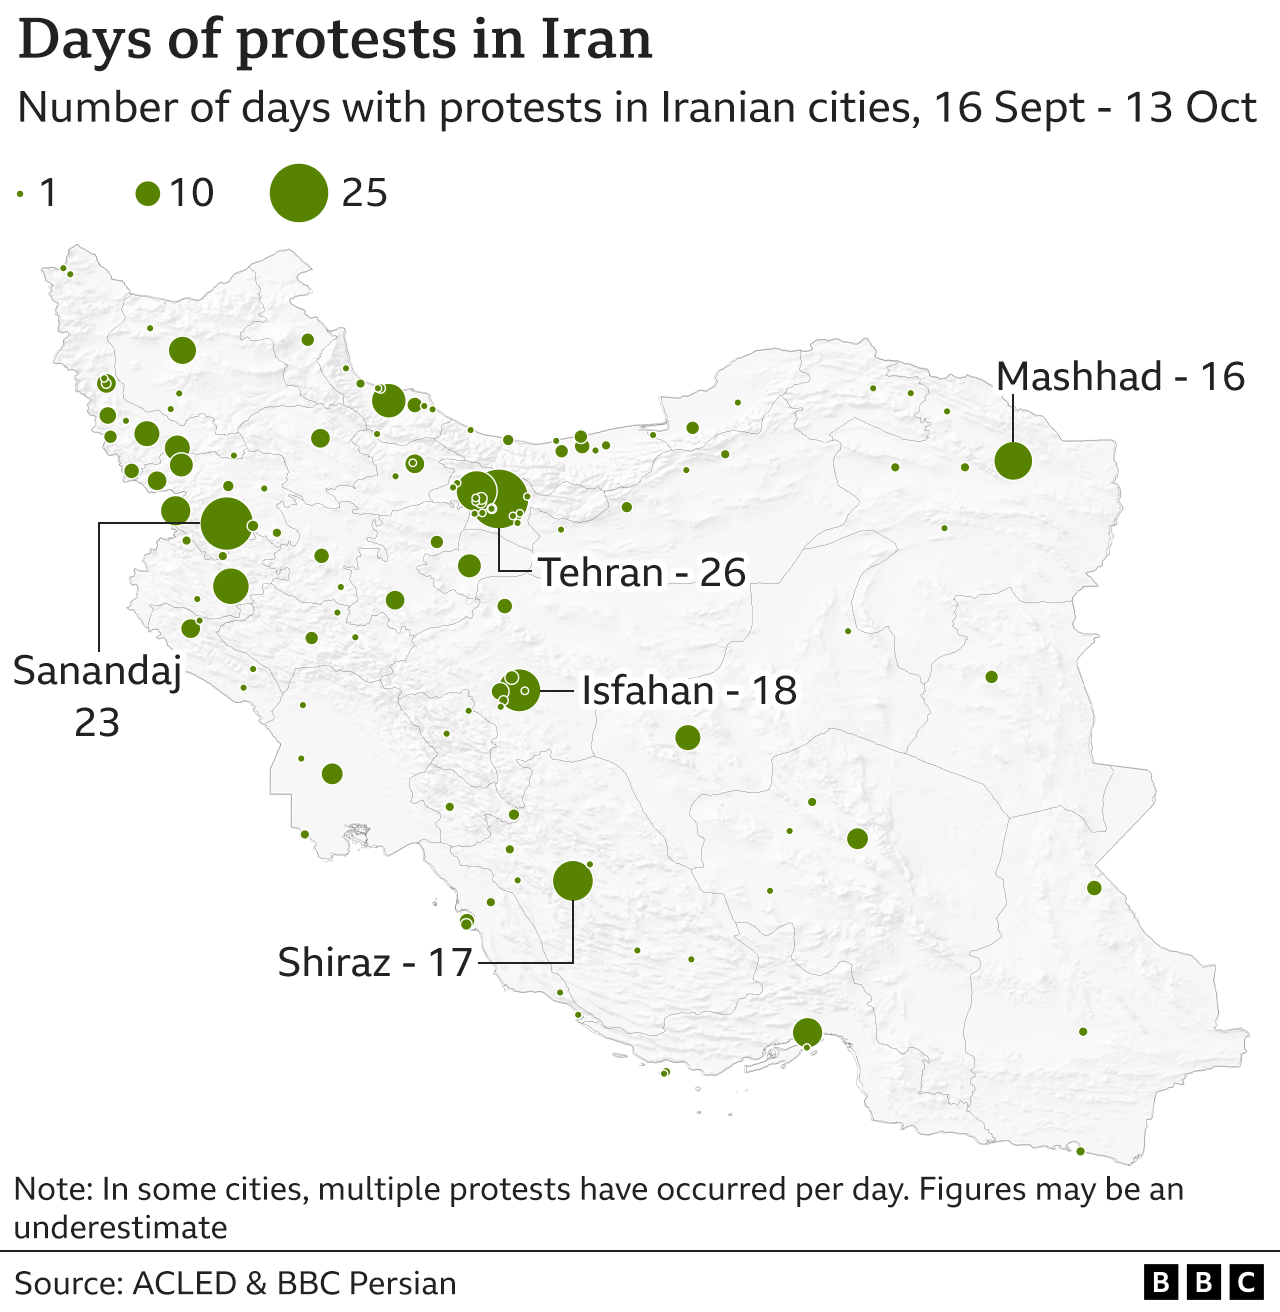 BBC verified Iran days of protest map